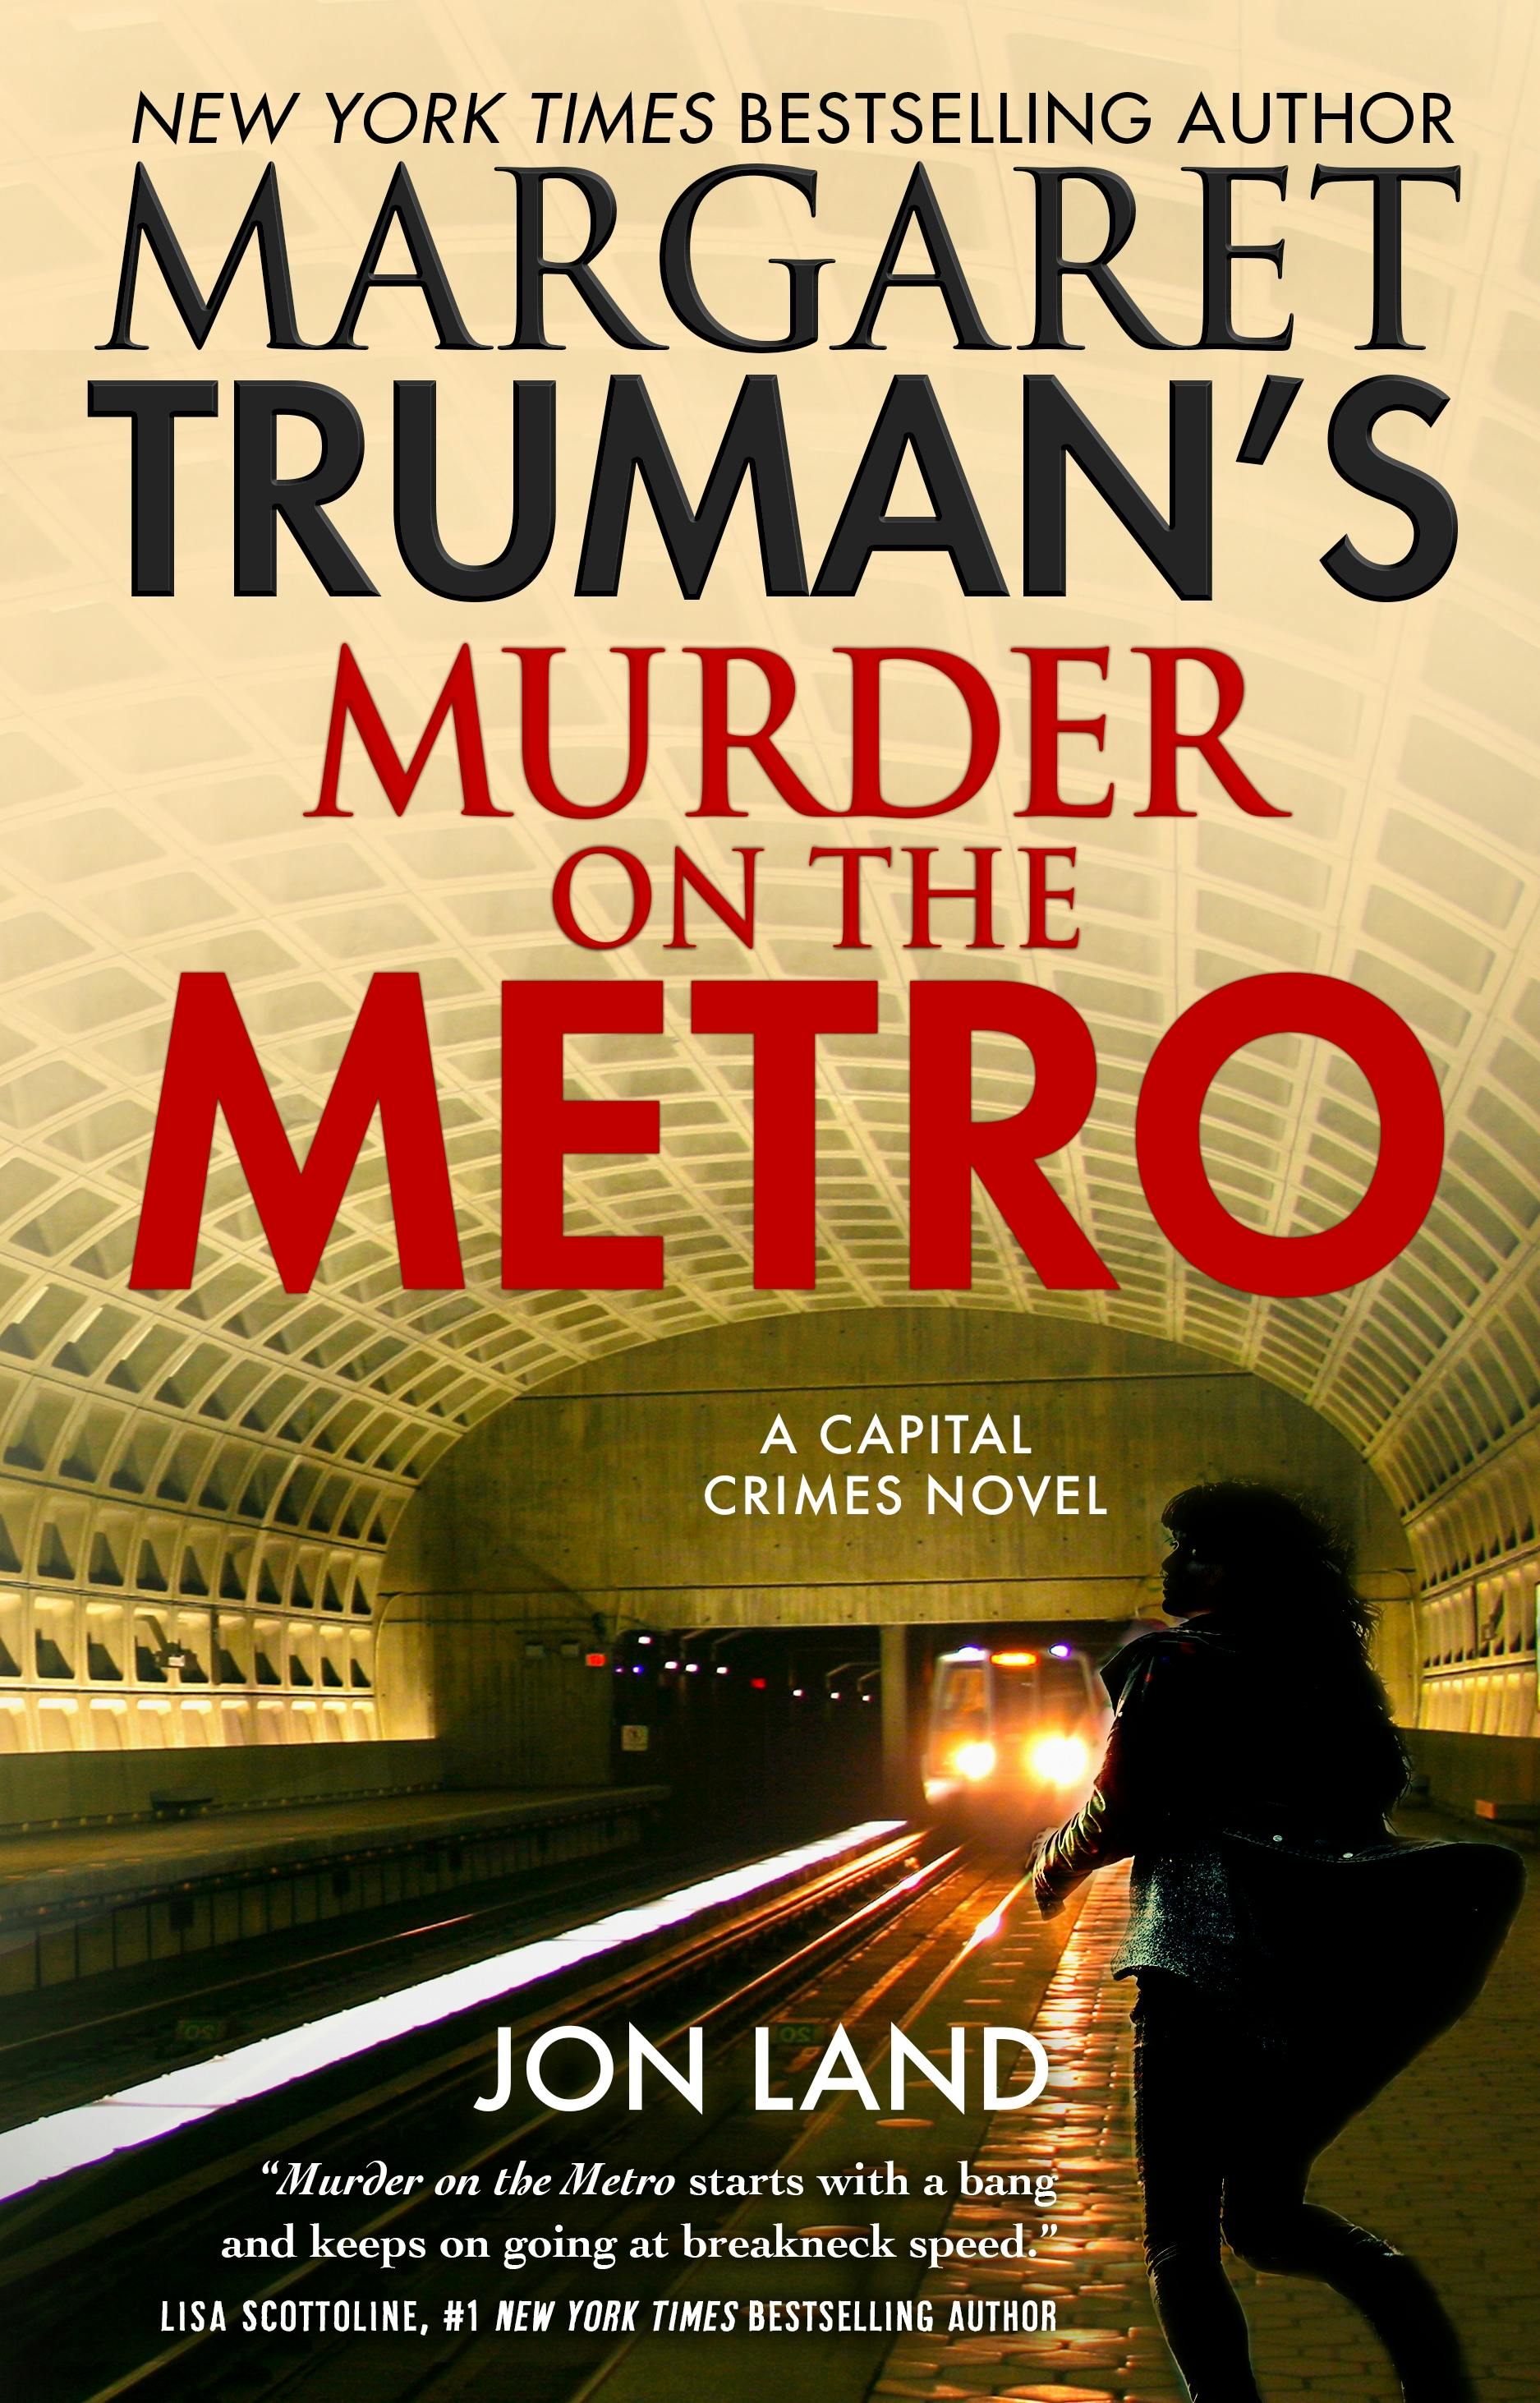 Cover for the book titled as: Margaret Truman's Murder on the Metro